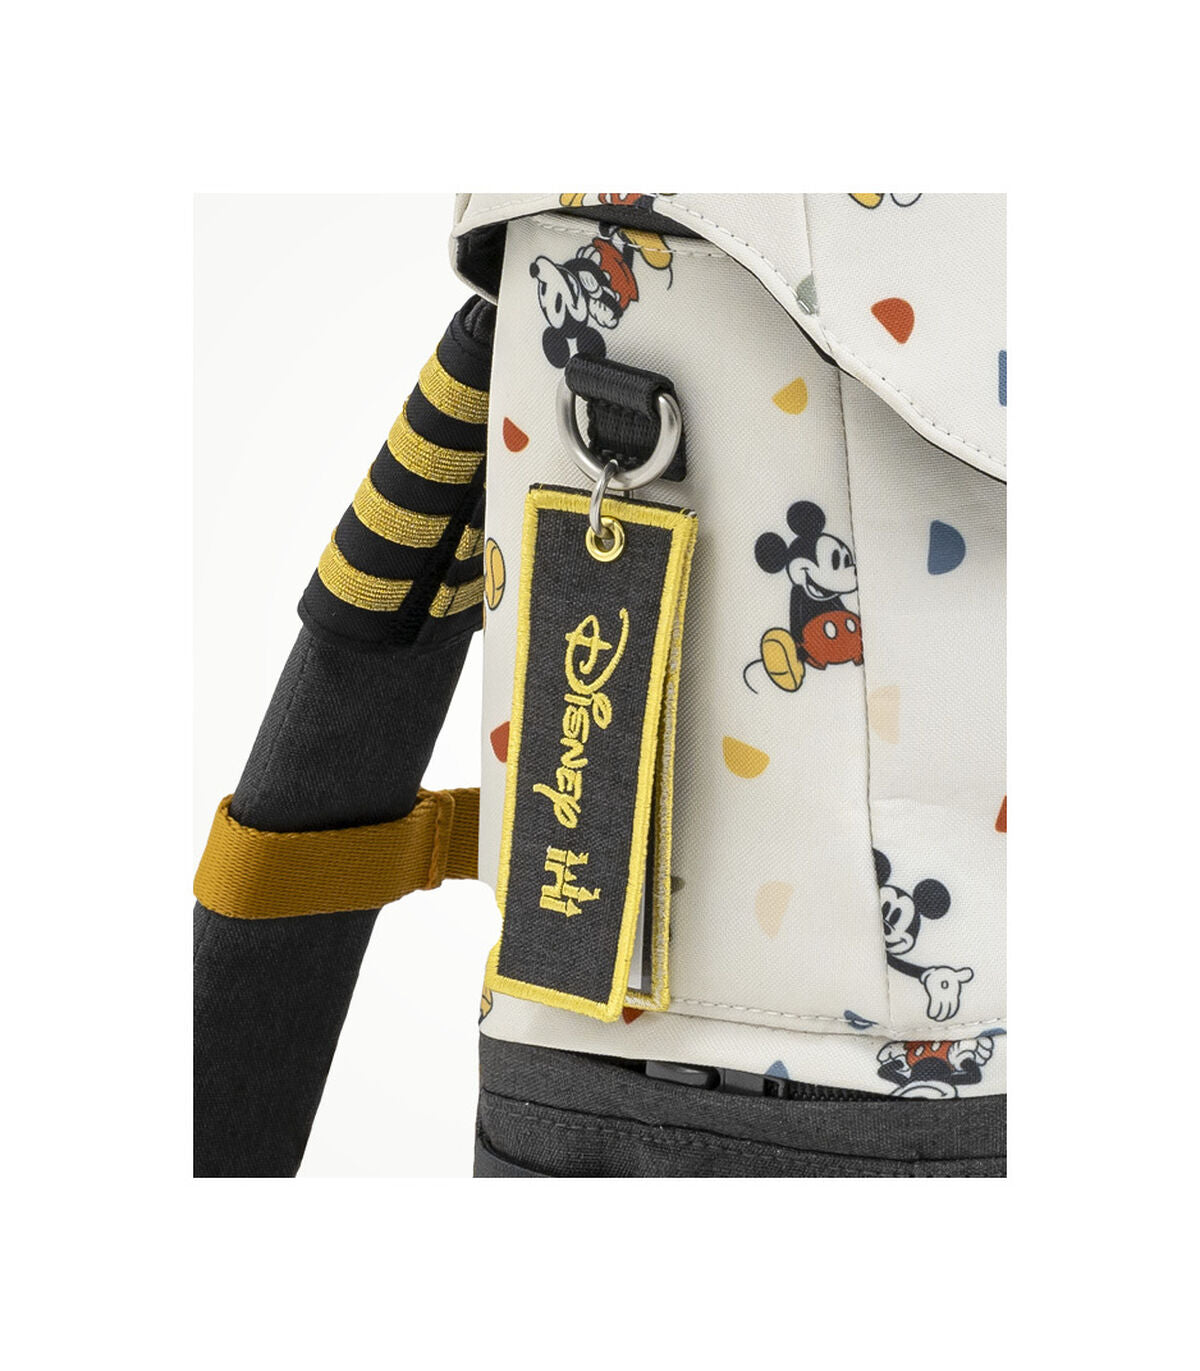 JetKids™ by Stokke® Crew Backpack (Mickey Celebration)【Pre Order Now! Delivery on first of March】